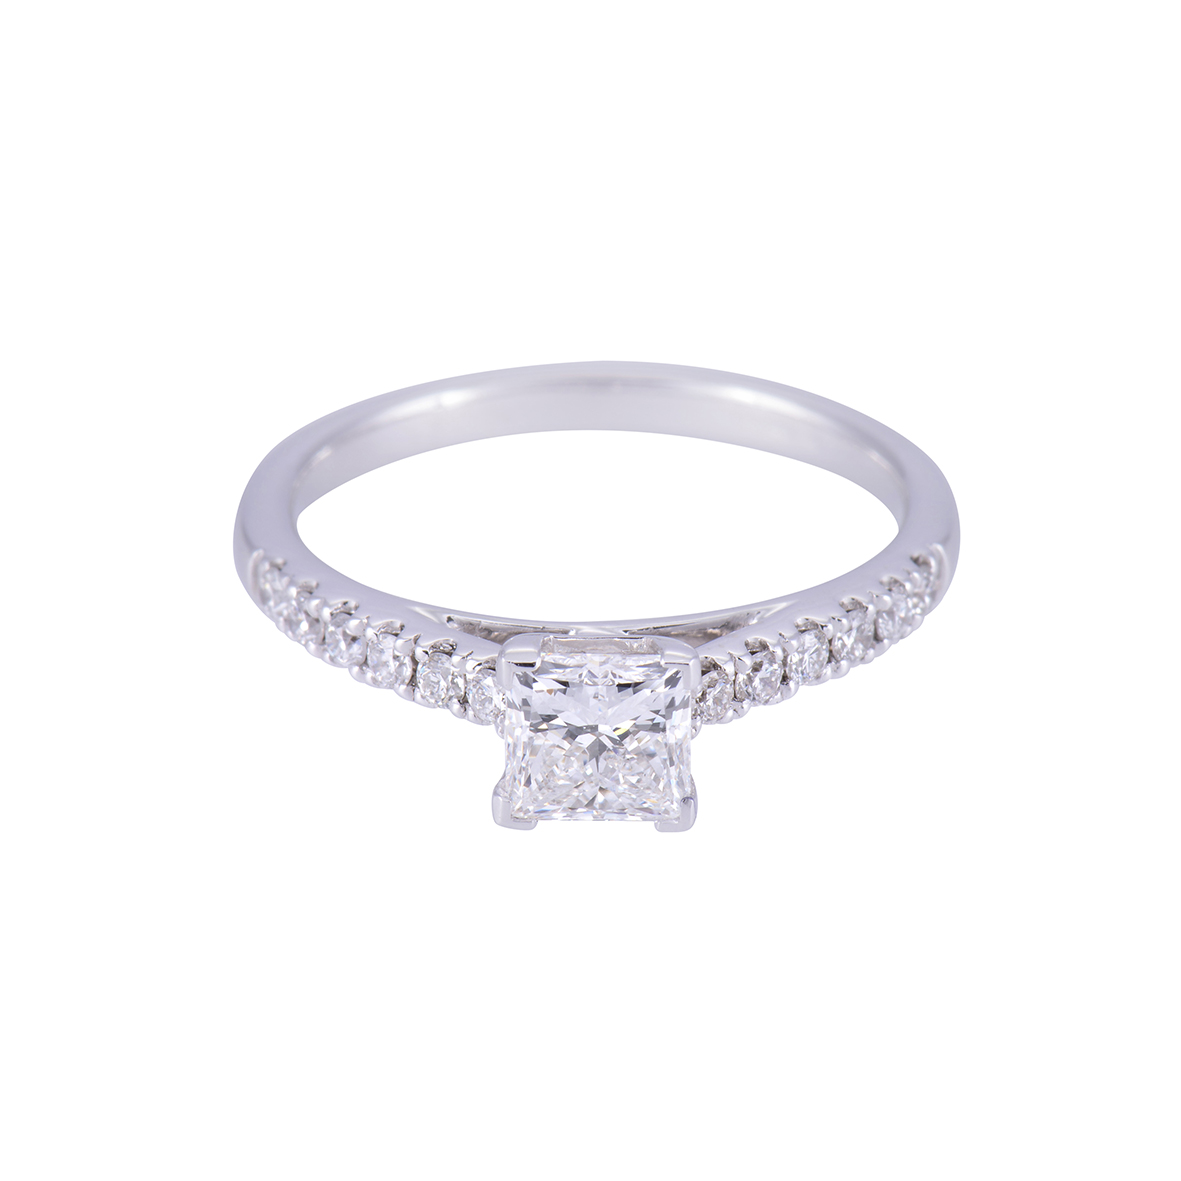 18ct White Gold Princess Cut Diamond Solitaire with Diamond Shoulders, Approx. 1.00ct Total Weight